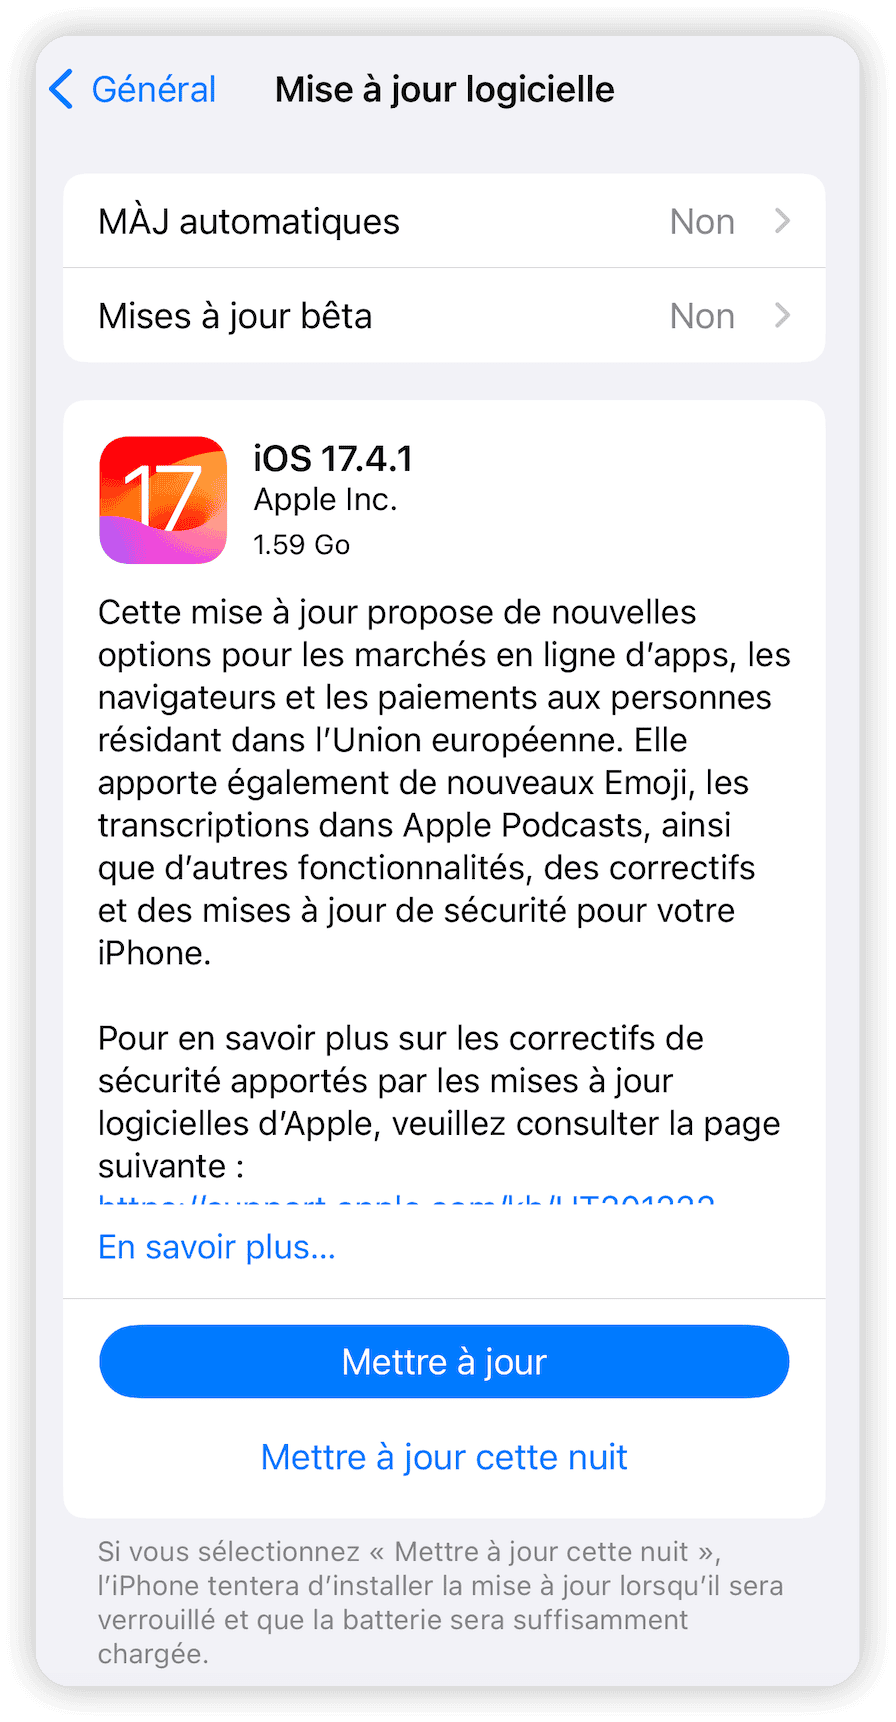 Update your iPhone